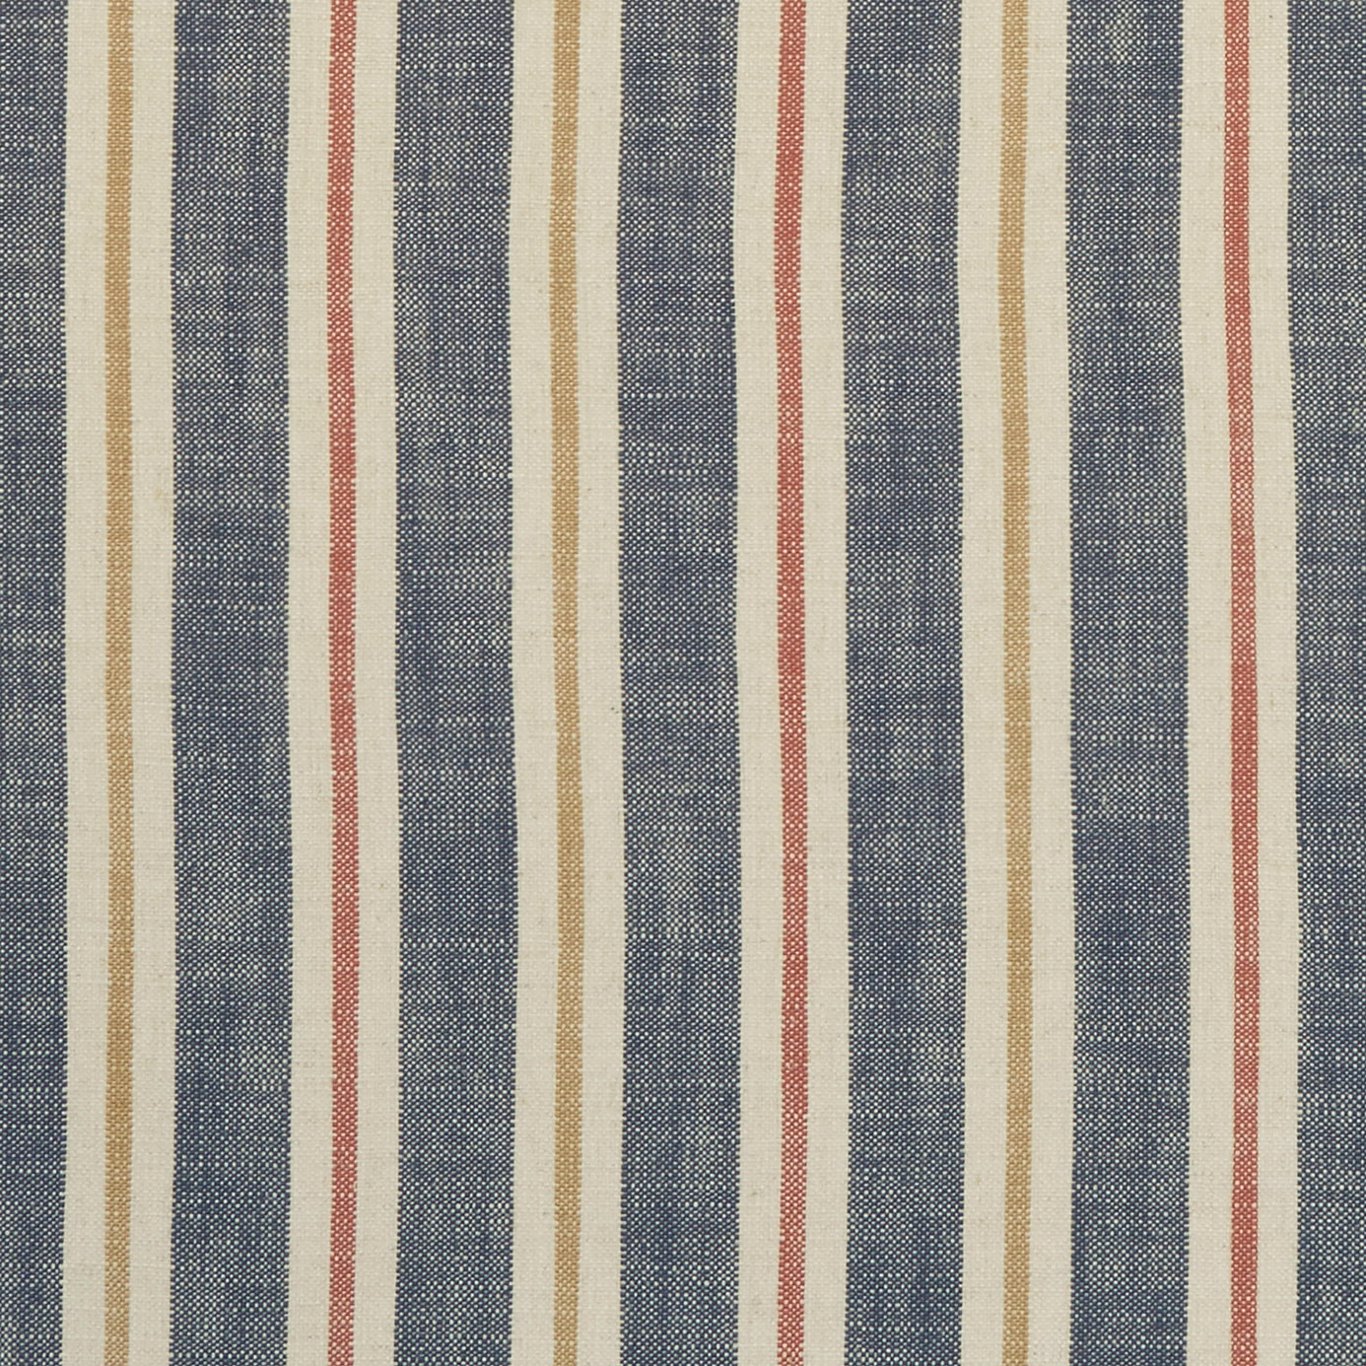 Sackville Stripe Midnight/Spice Fabric by CNC